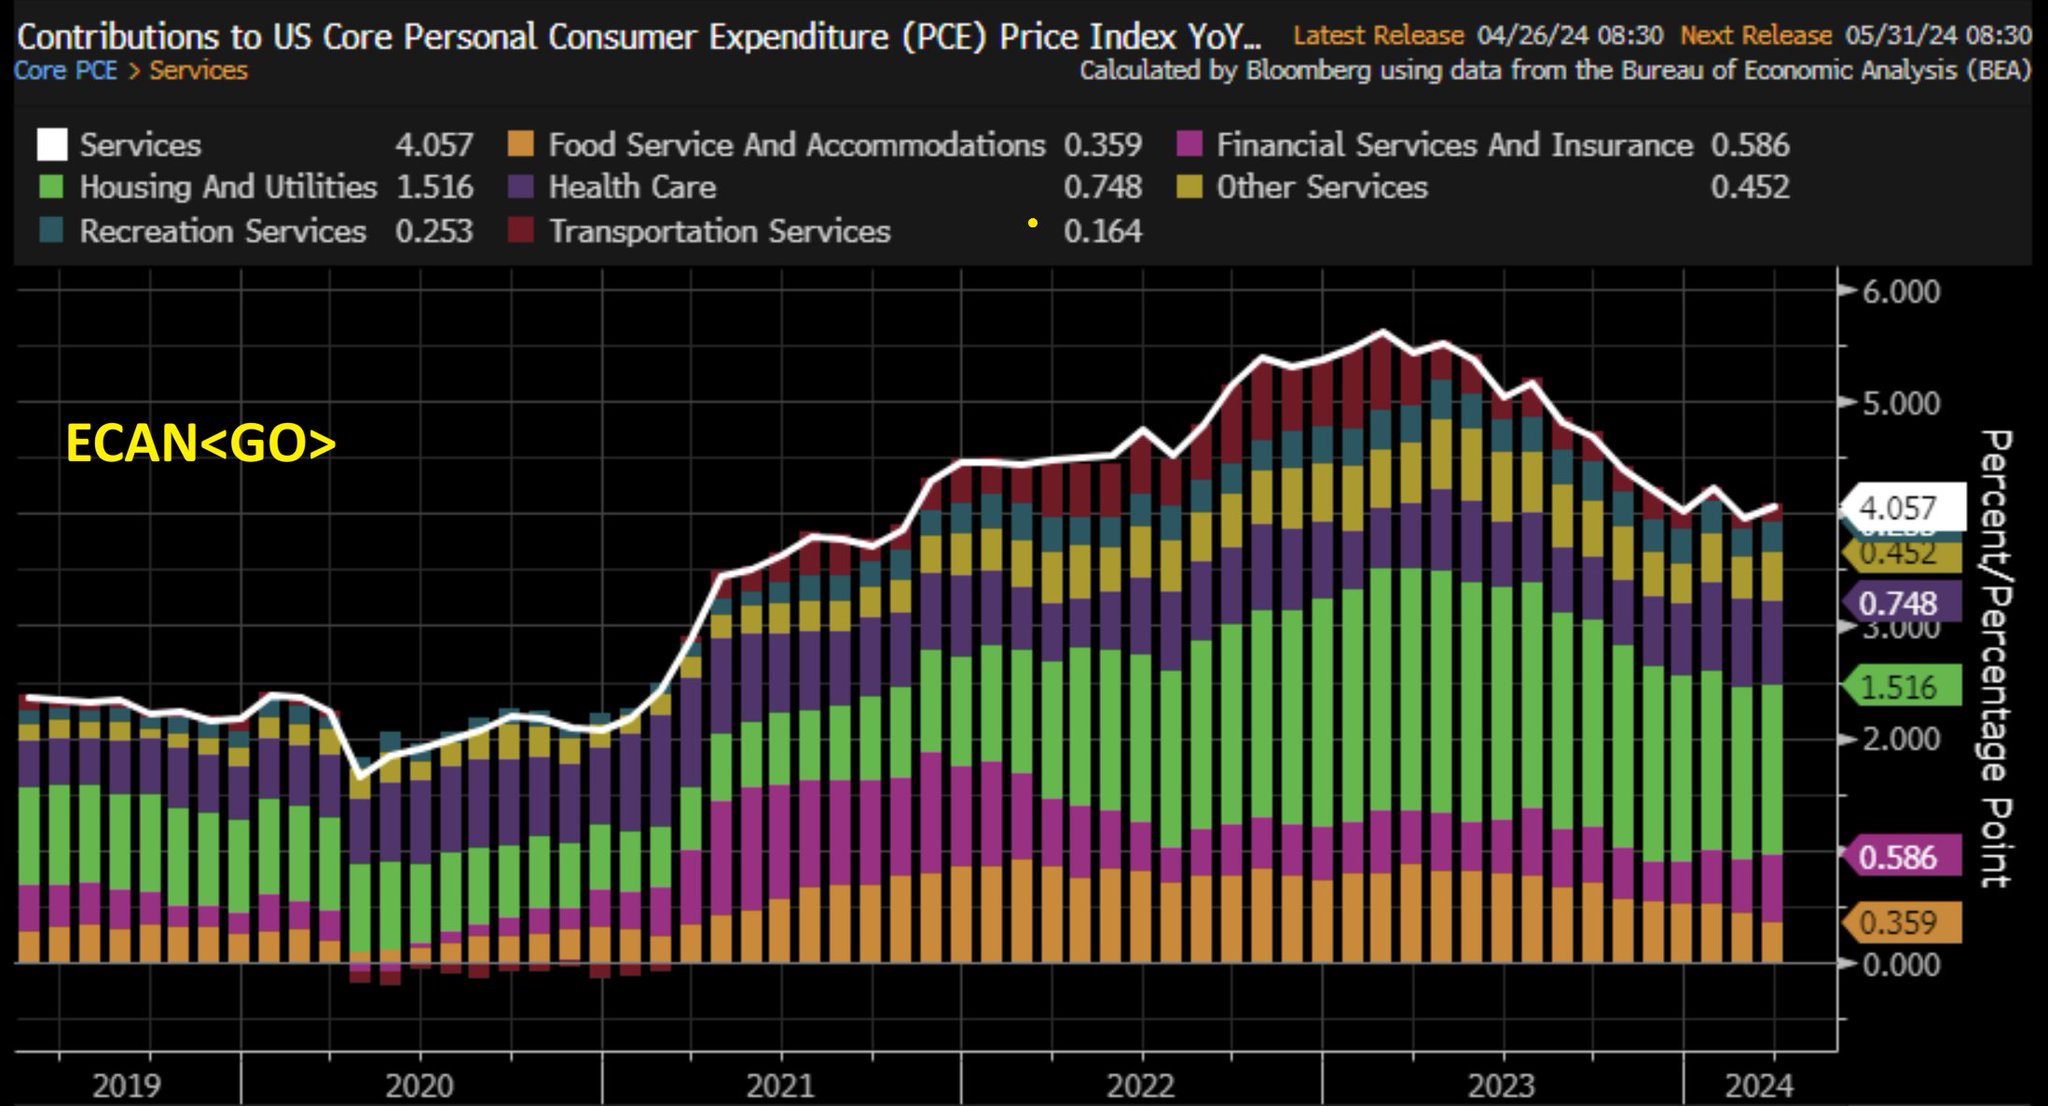 Michael McDonough on X: "Core Services PCE Price Index YoY% w/Contributions:  https://t.co/5jzMmluaLe" / X